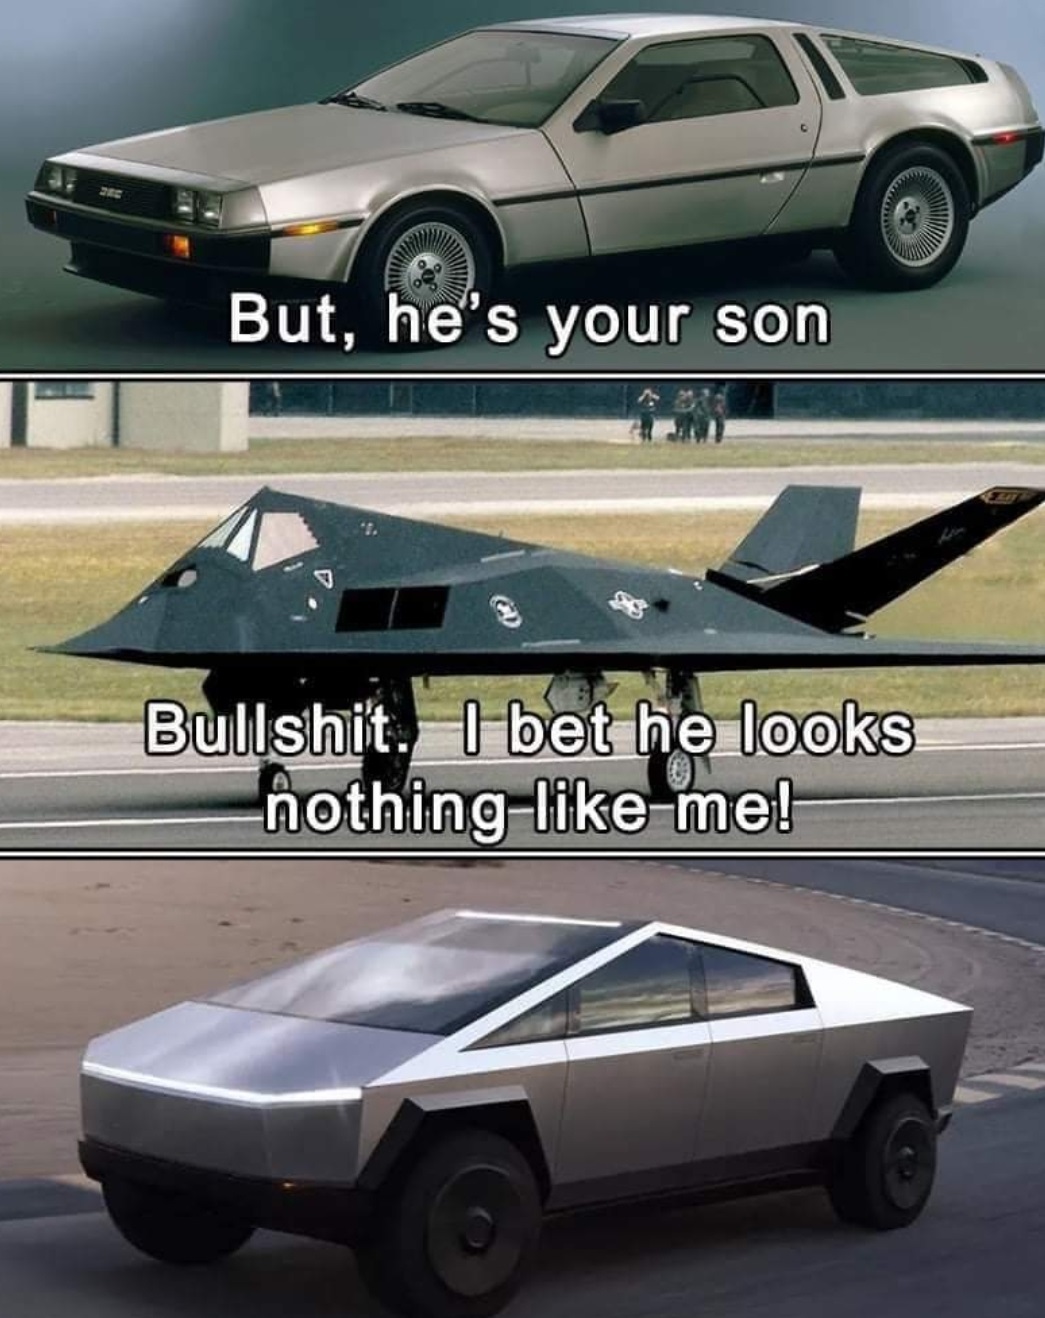 stealth f117 - But, he's your son Sms Bullshit. I bet he looks nothing me!